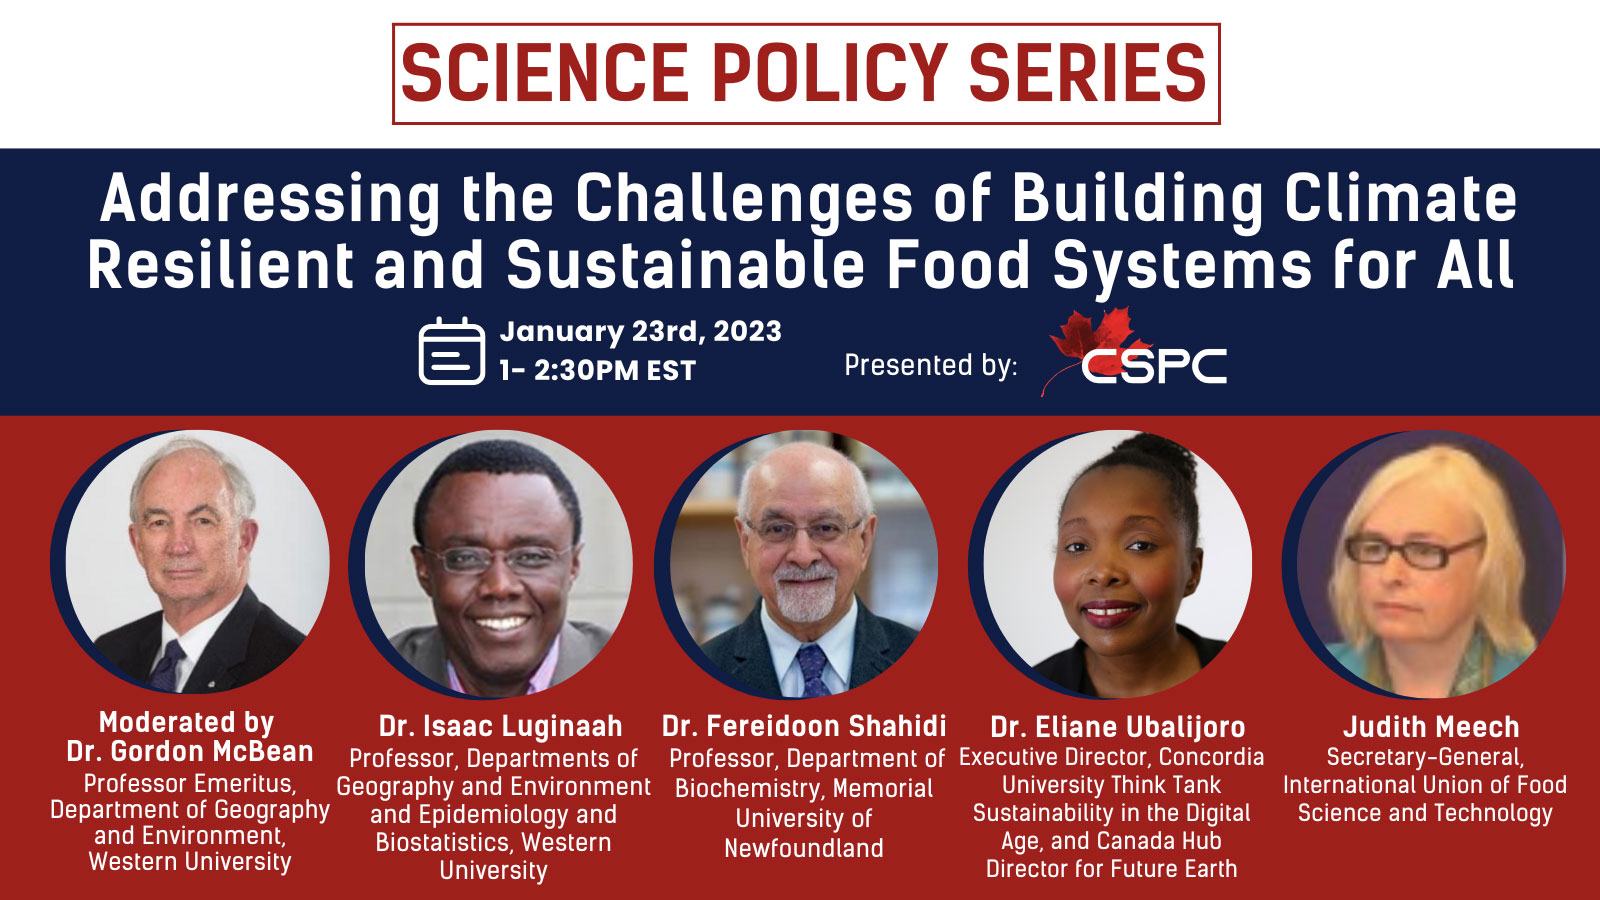 Addressing the Challenges of Building Climate Resilient and Sustainable Food Systems for All